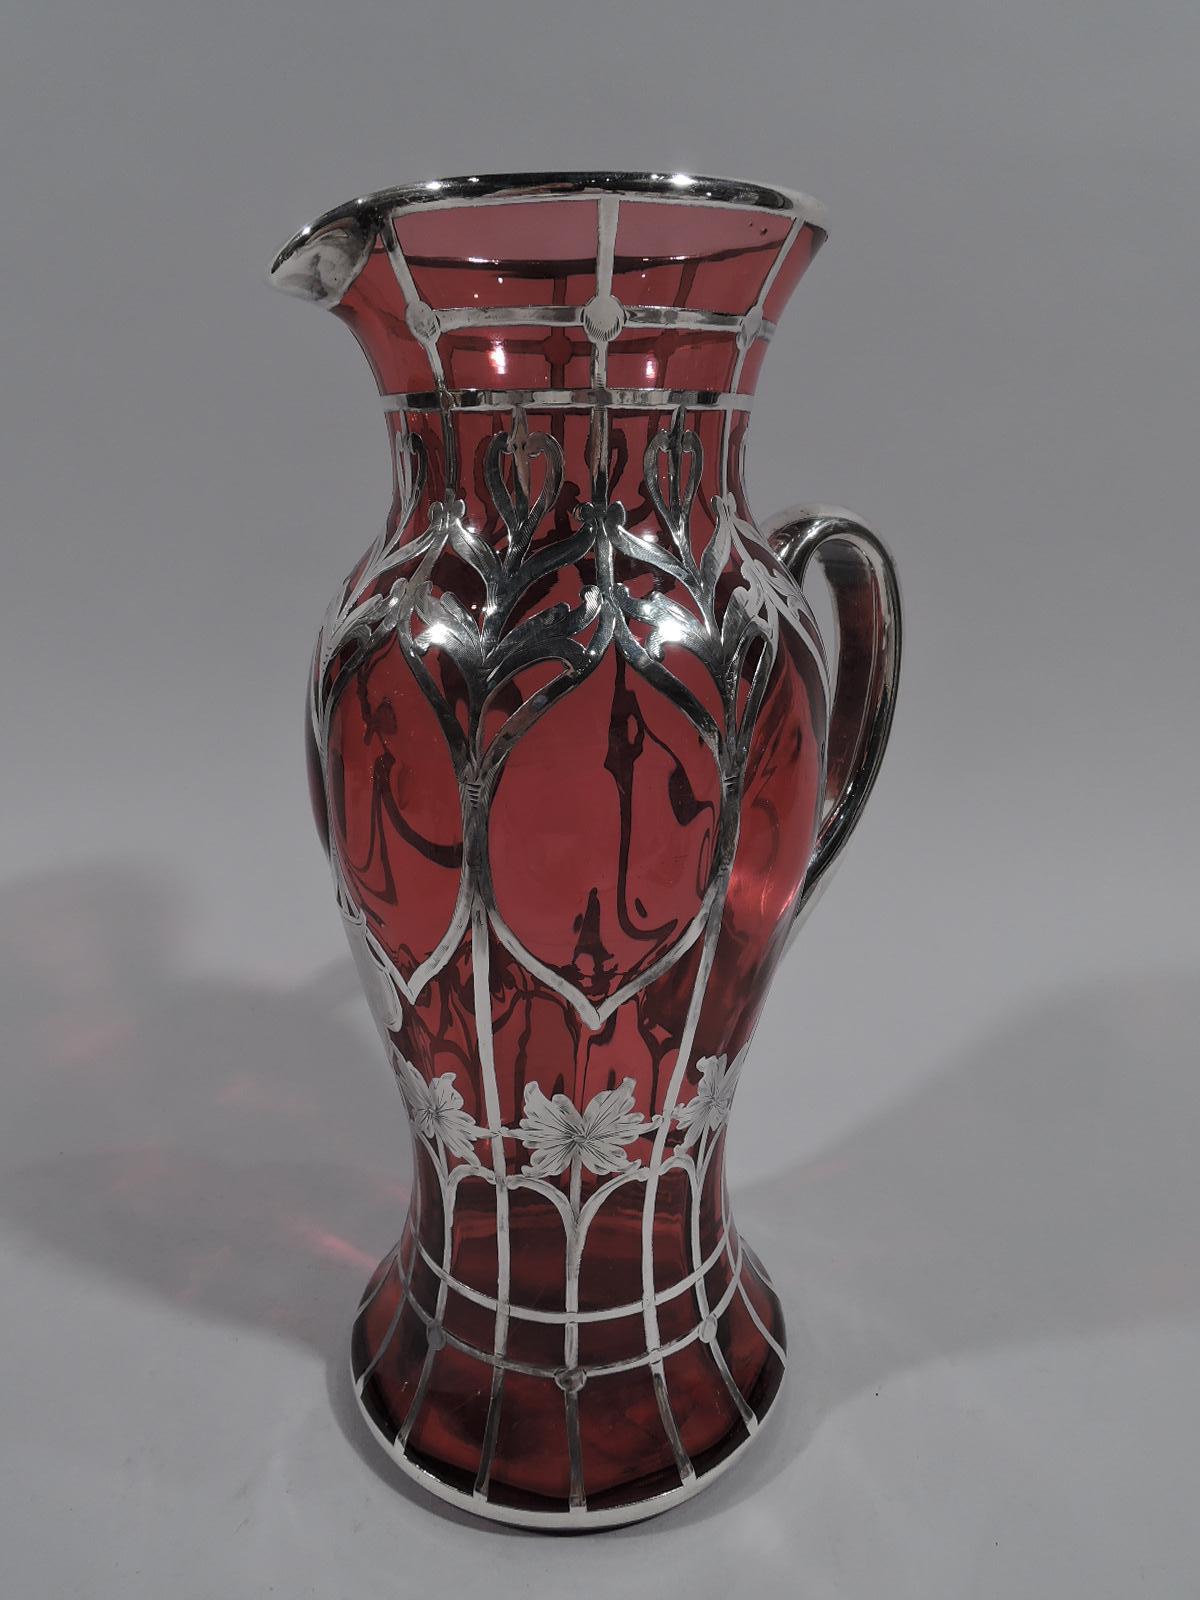 Turn of the century American Art Nouveau red glass claret jug with engraved silver overlay. Baluster with spread foot, looping handle, and lip spout. Vertical trellis-style grid with stylized stem flowers and leaves. A controlled rectilinear pattern